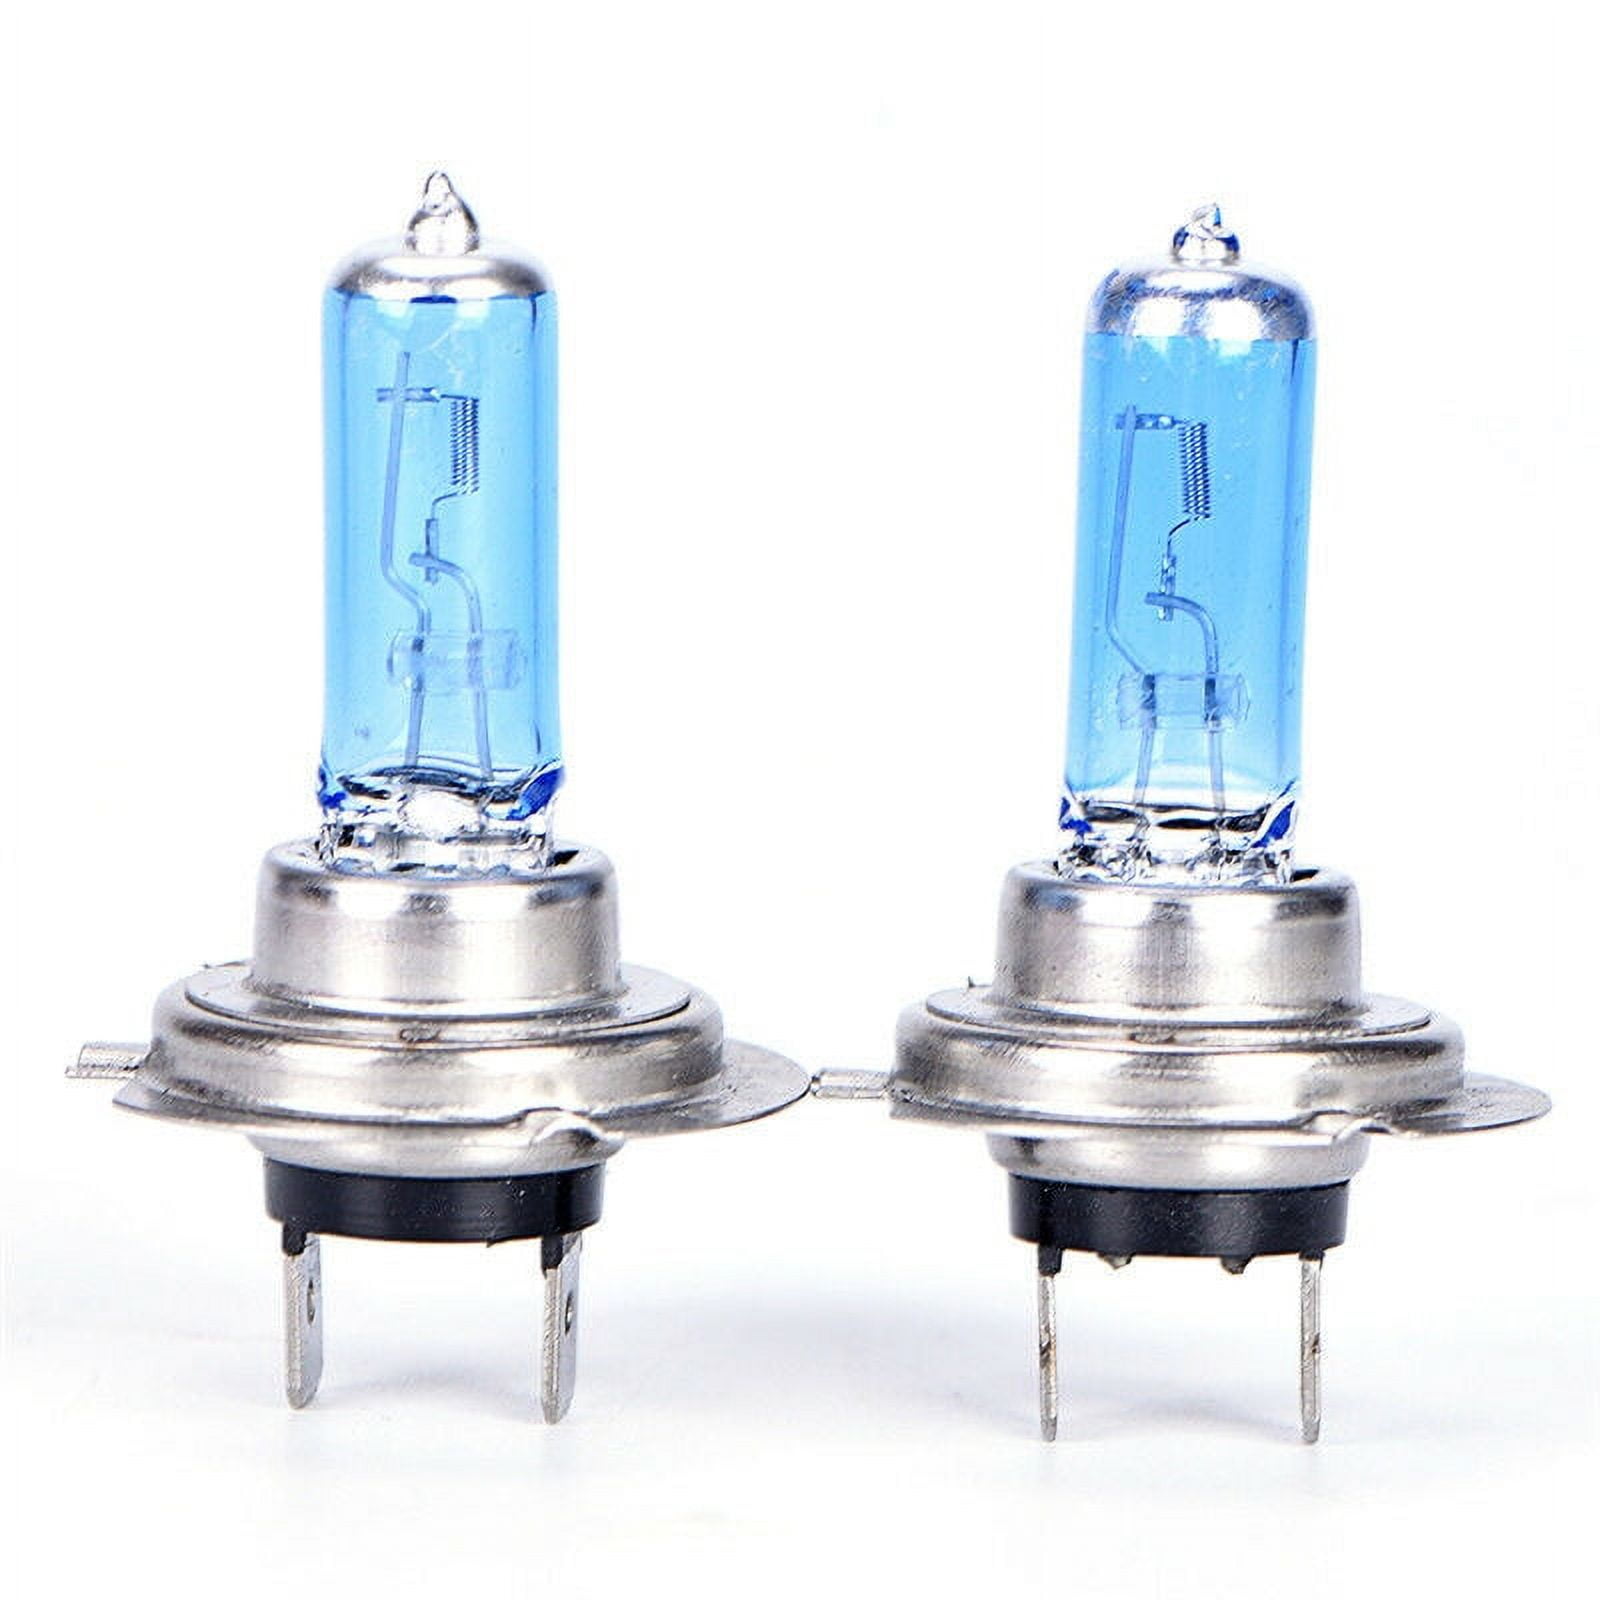 Pulilang H7 LED Headlight Bulbs, 55W 12000LM 6500K White 300% Brighter LED  H7 Car Low/High Beam Lamps, Anti Error Canbus, 1:1 Size Non Polarity